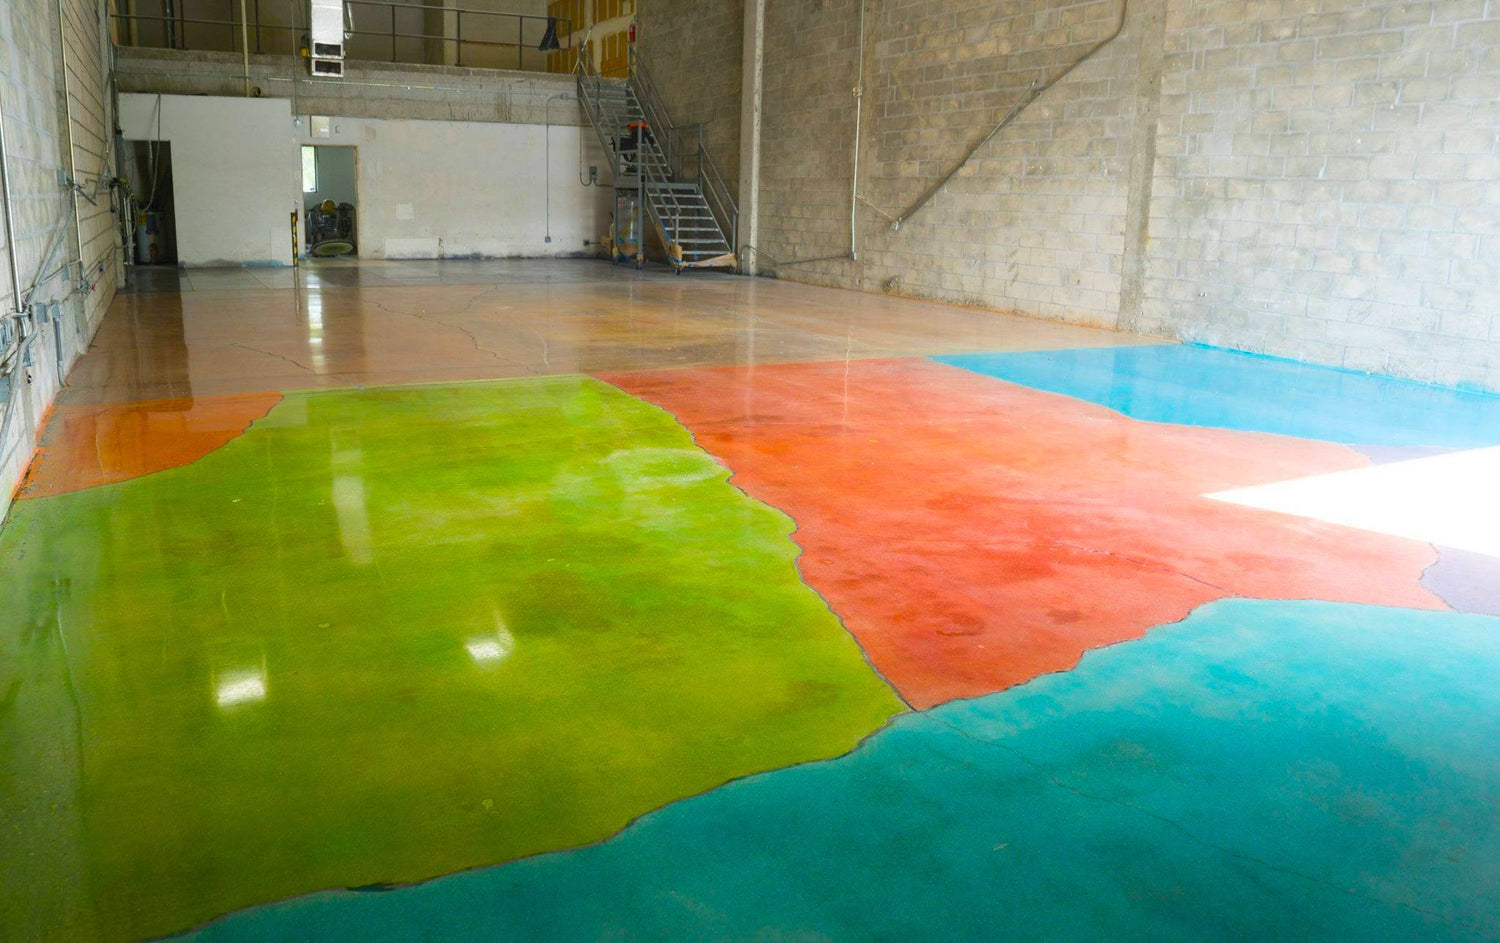 How to Stain Concrete Floors - Xtreme Polishing Systems